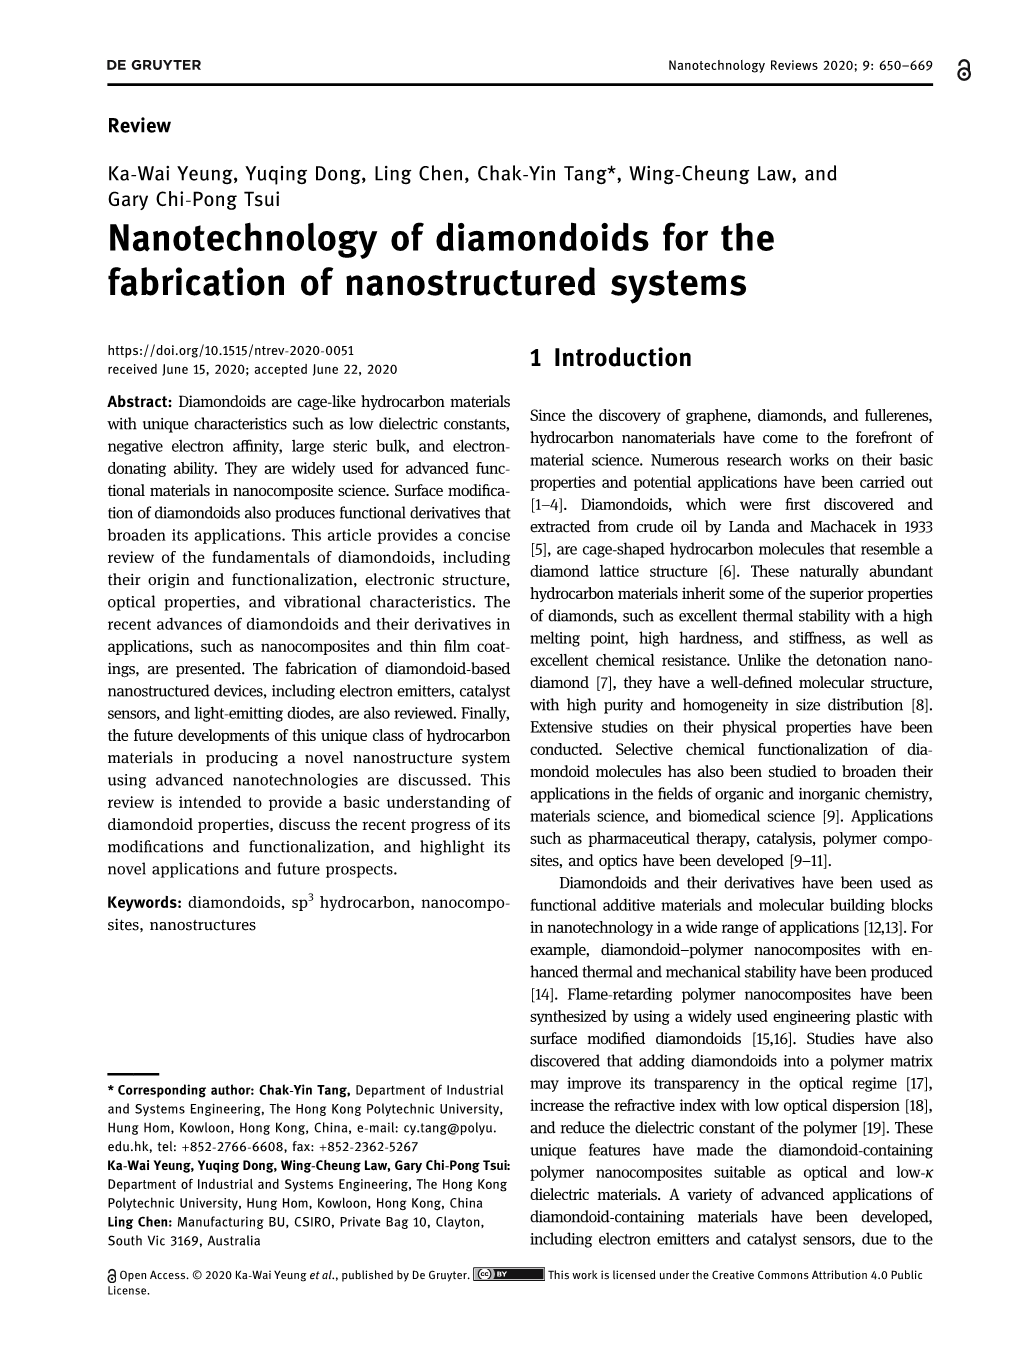 Nanotechnology of Diamondoids for the Fabrication of Nanostructured Systems